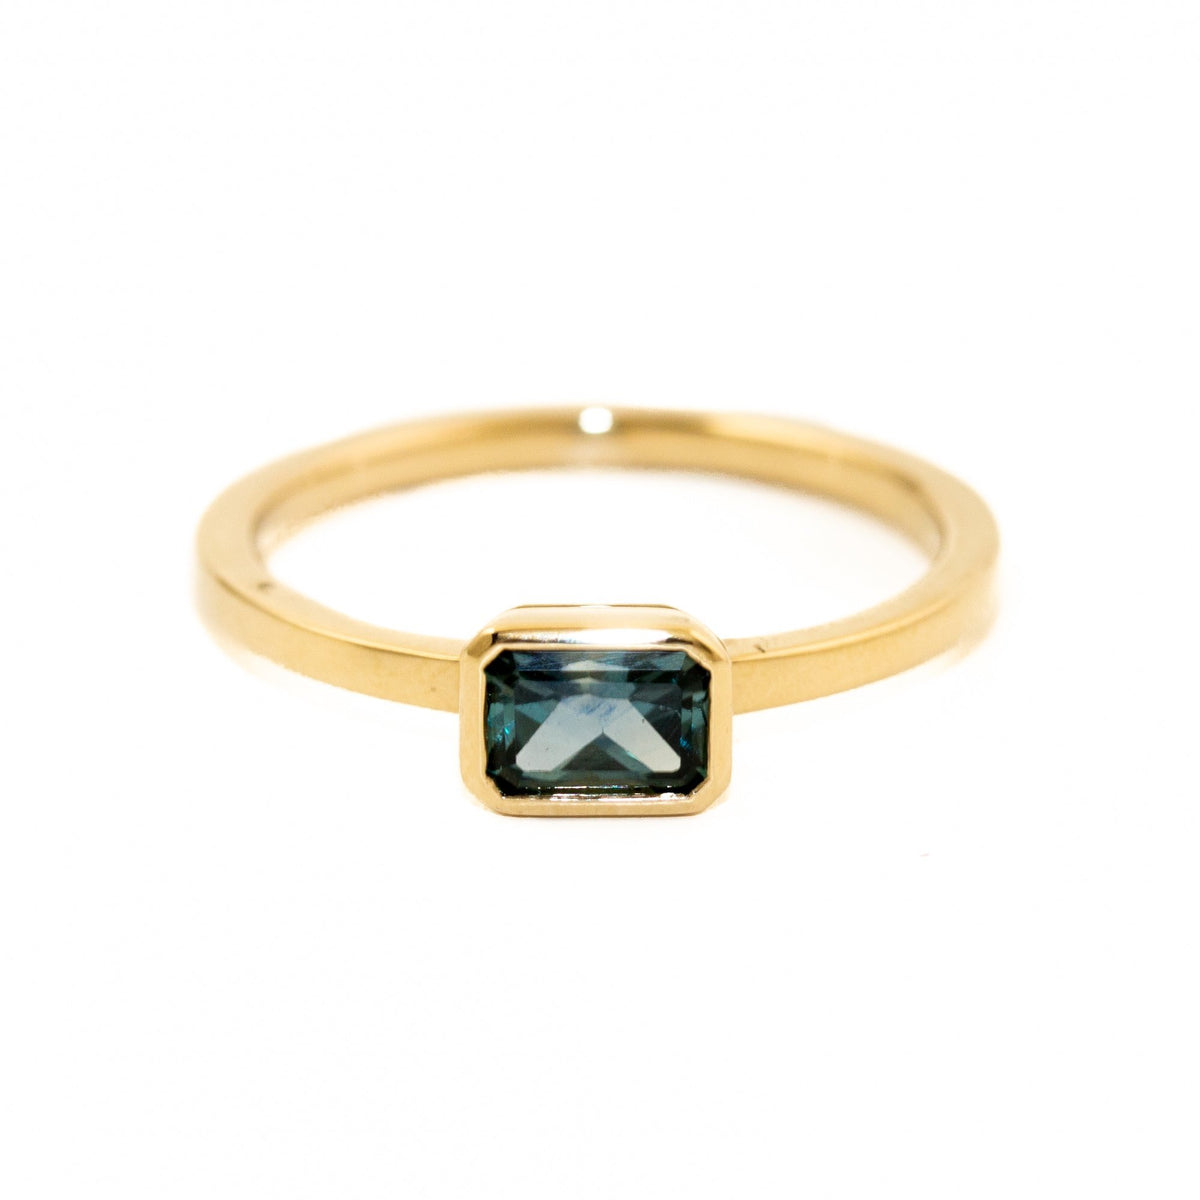 Gorgeous classic sapphire ring made by Kingdom. The emerald cut Montana sapphire is held in a claw 14 karat gold setting. Crafted with passion and detail in-mind, our new "Engagement" series aims to create timeless pieces to be cherished and admired over a lifetime.